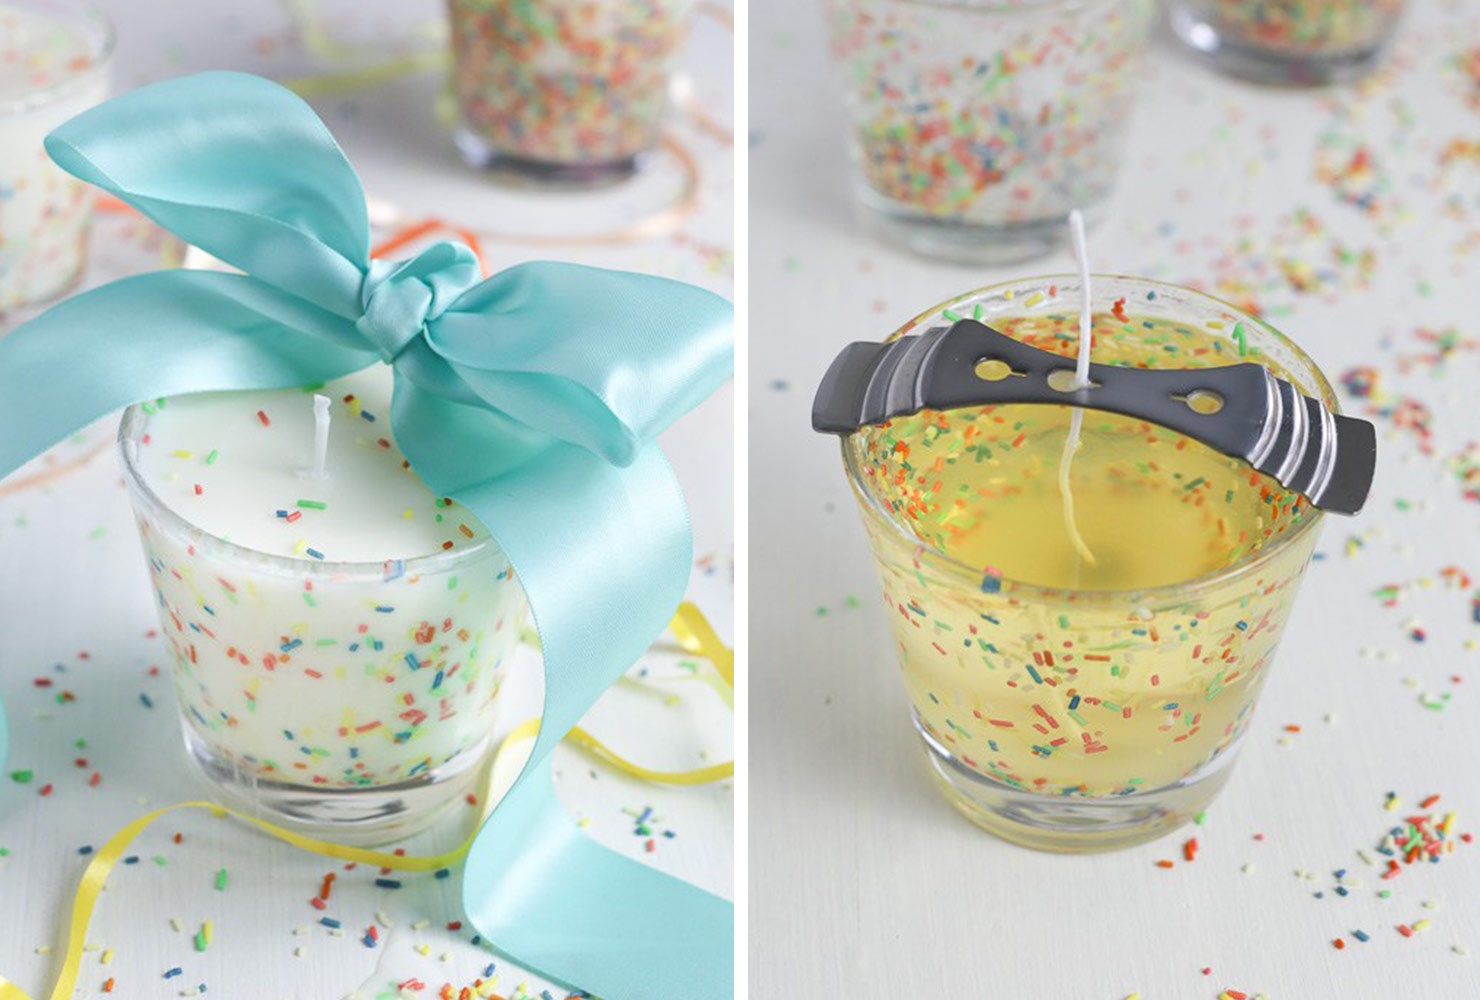 homemade candle with confetti